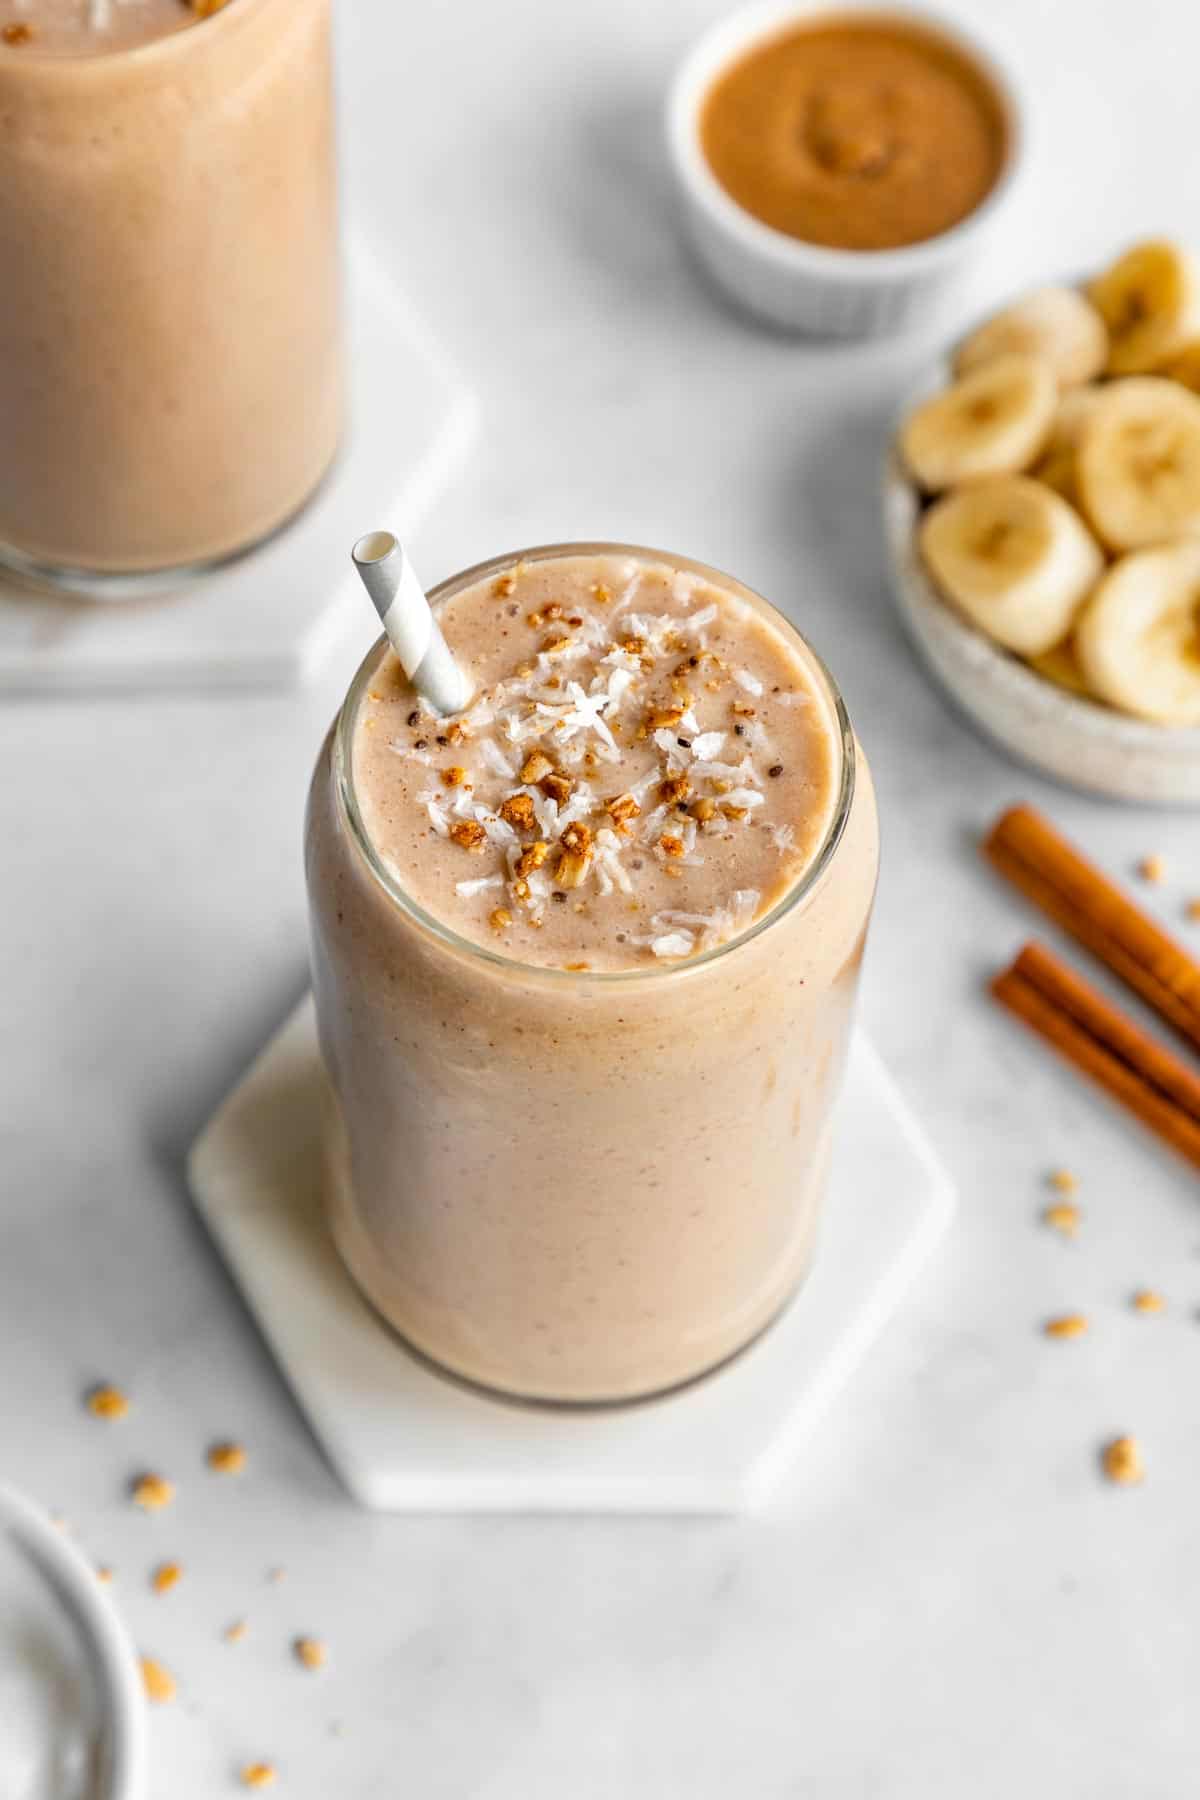 banana almond butter smoothie inside a glass surrounded by ingredients